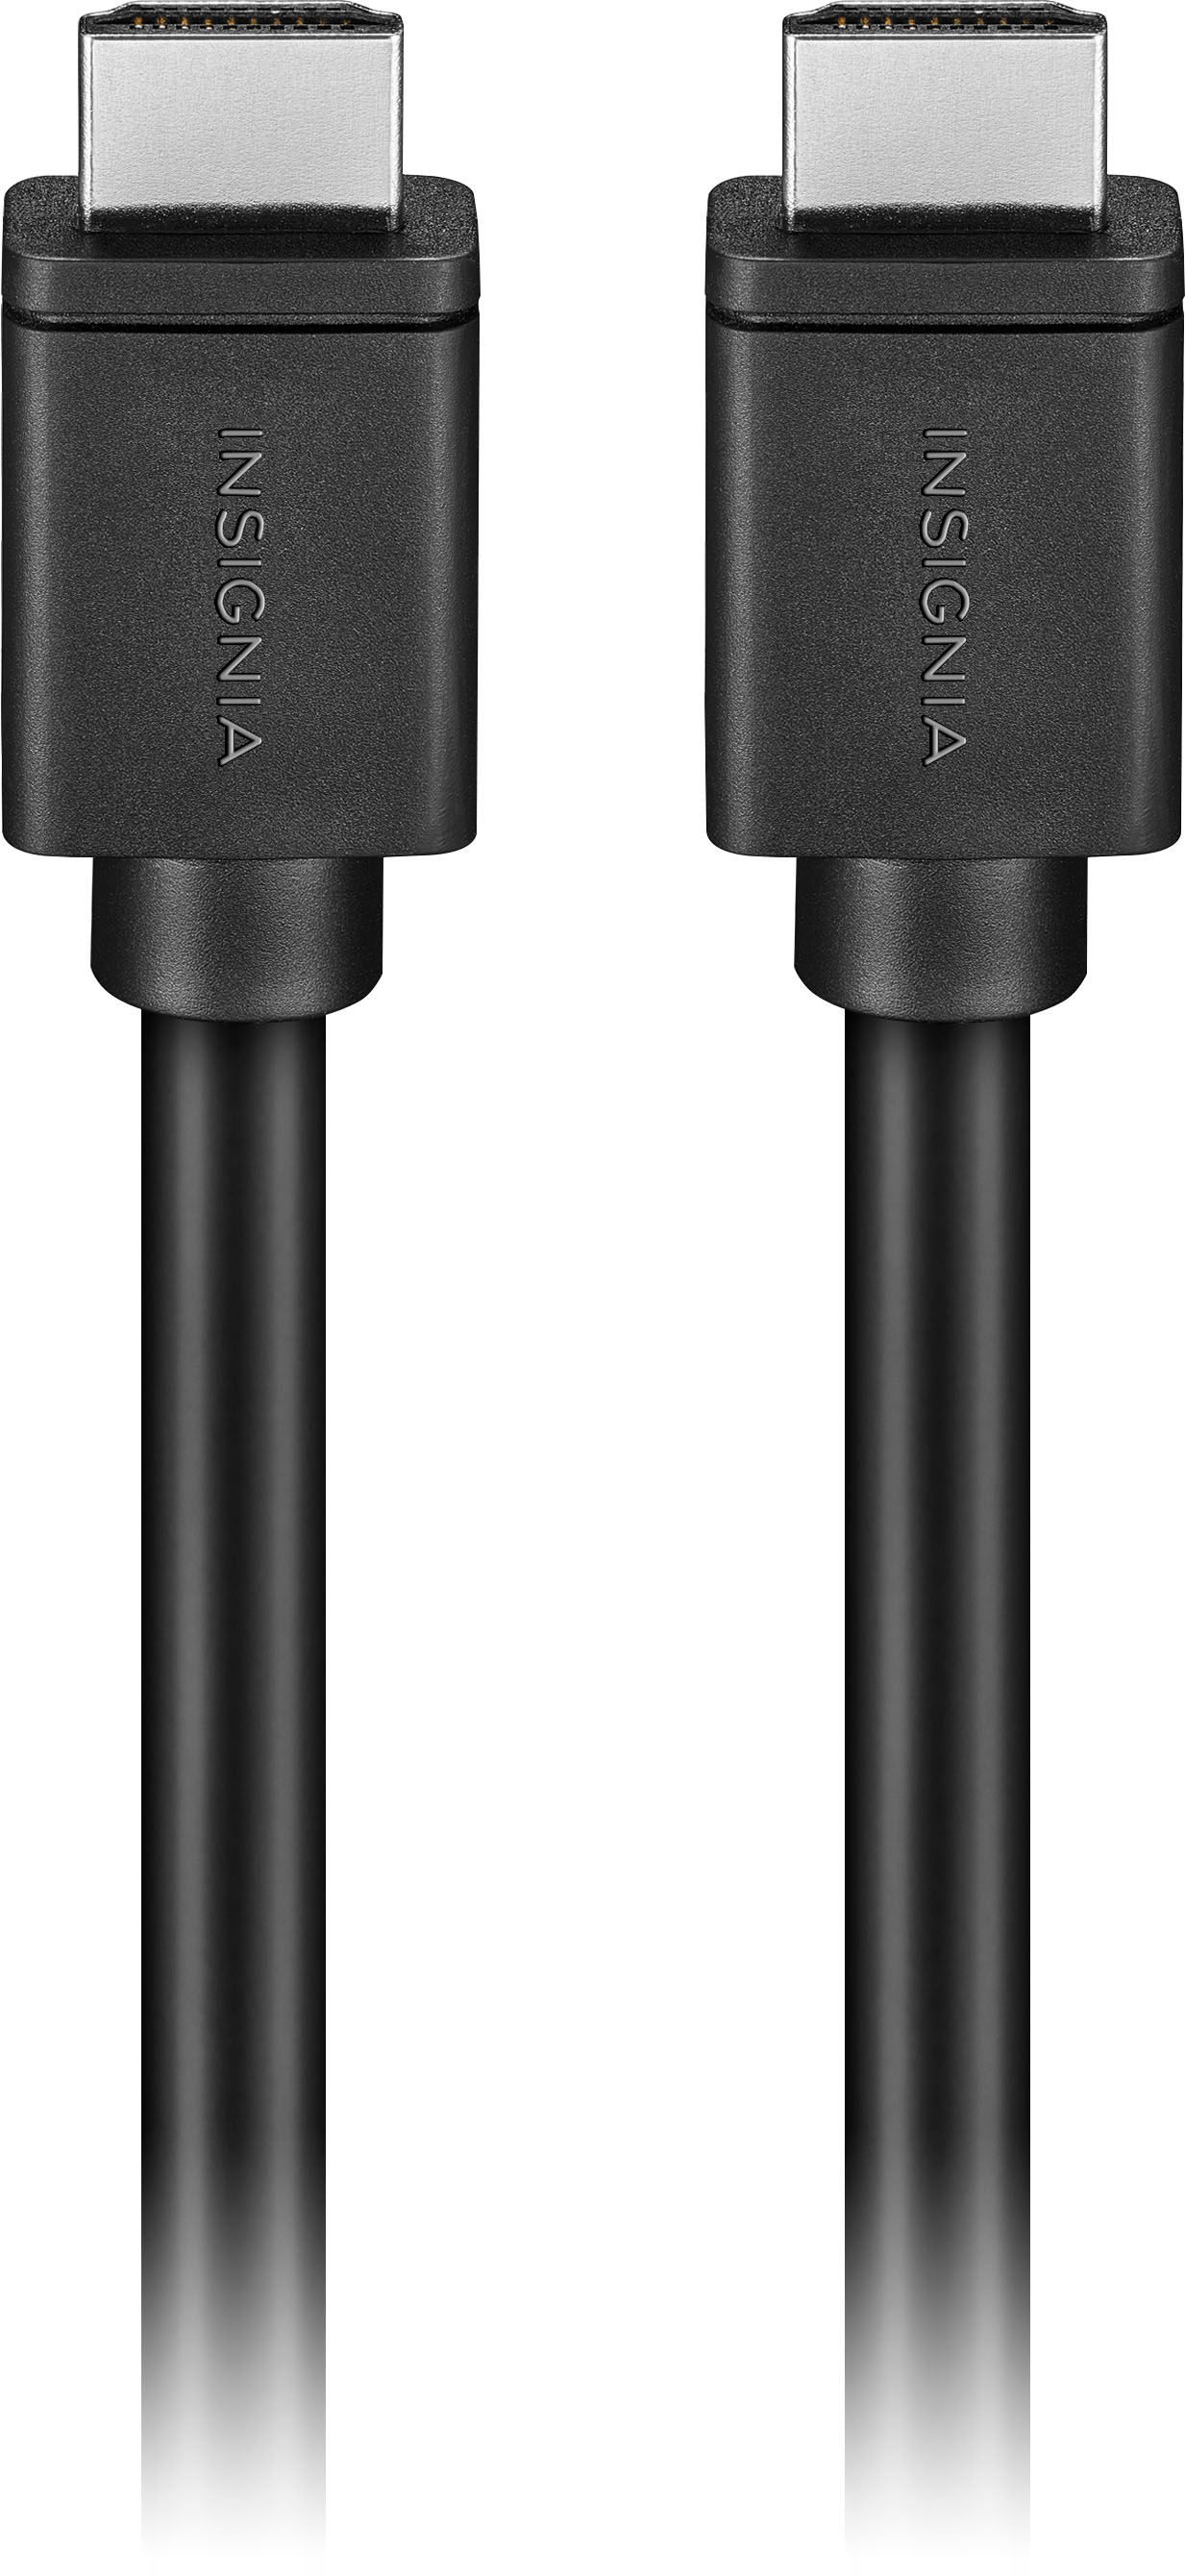 Insignia 25 4k Ultra Hd Hdmi Cable Black Ns Hg25507 Best Buy